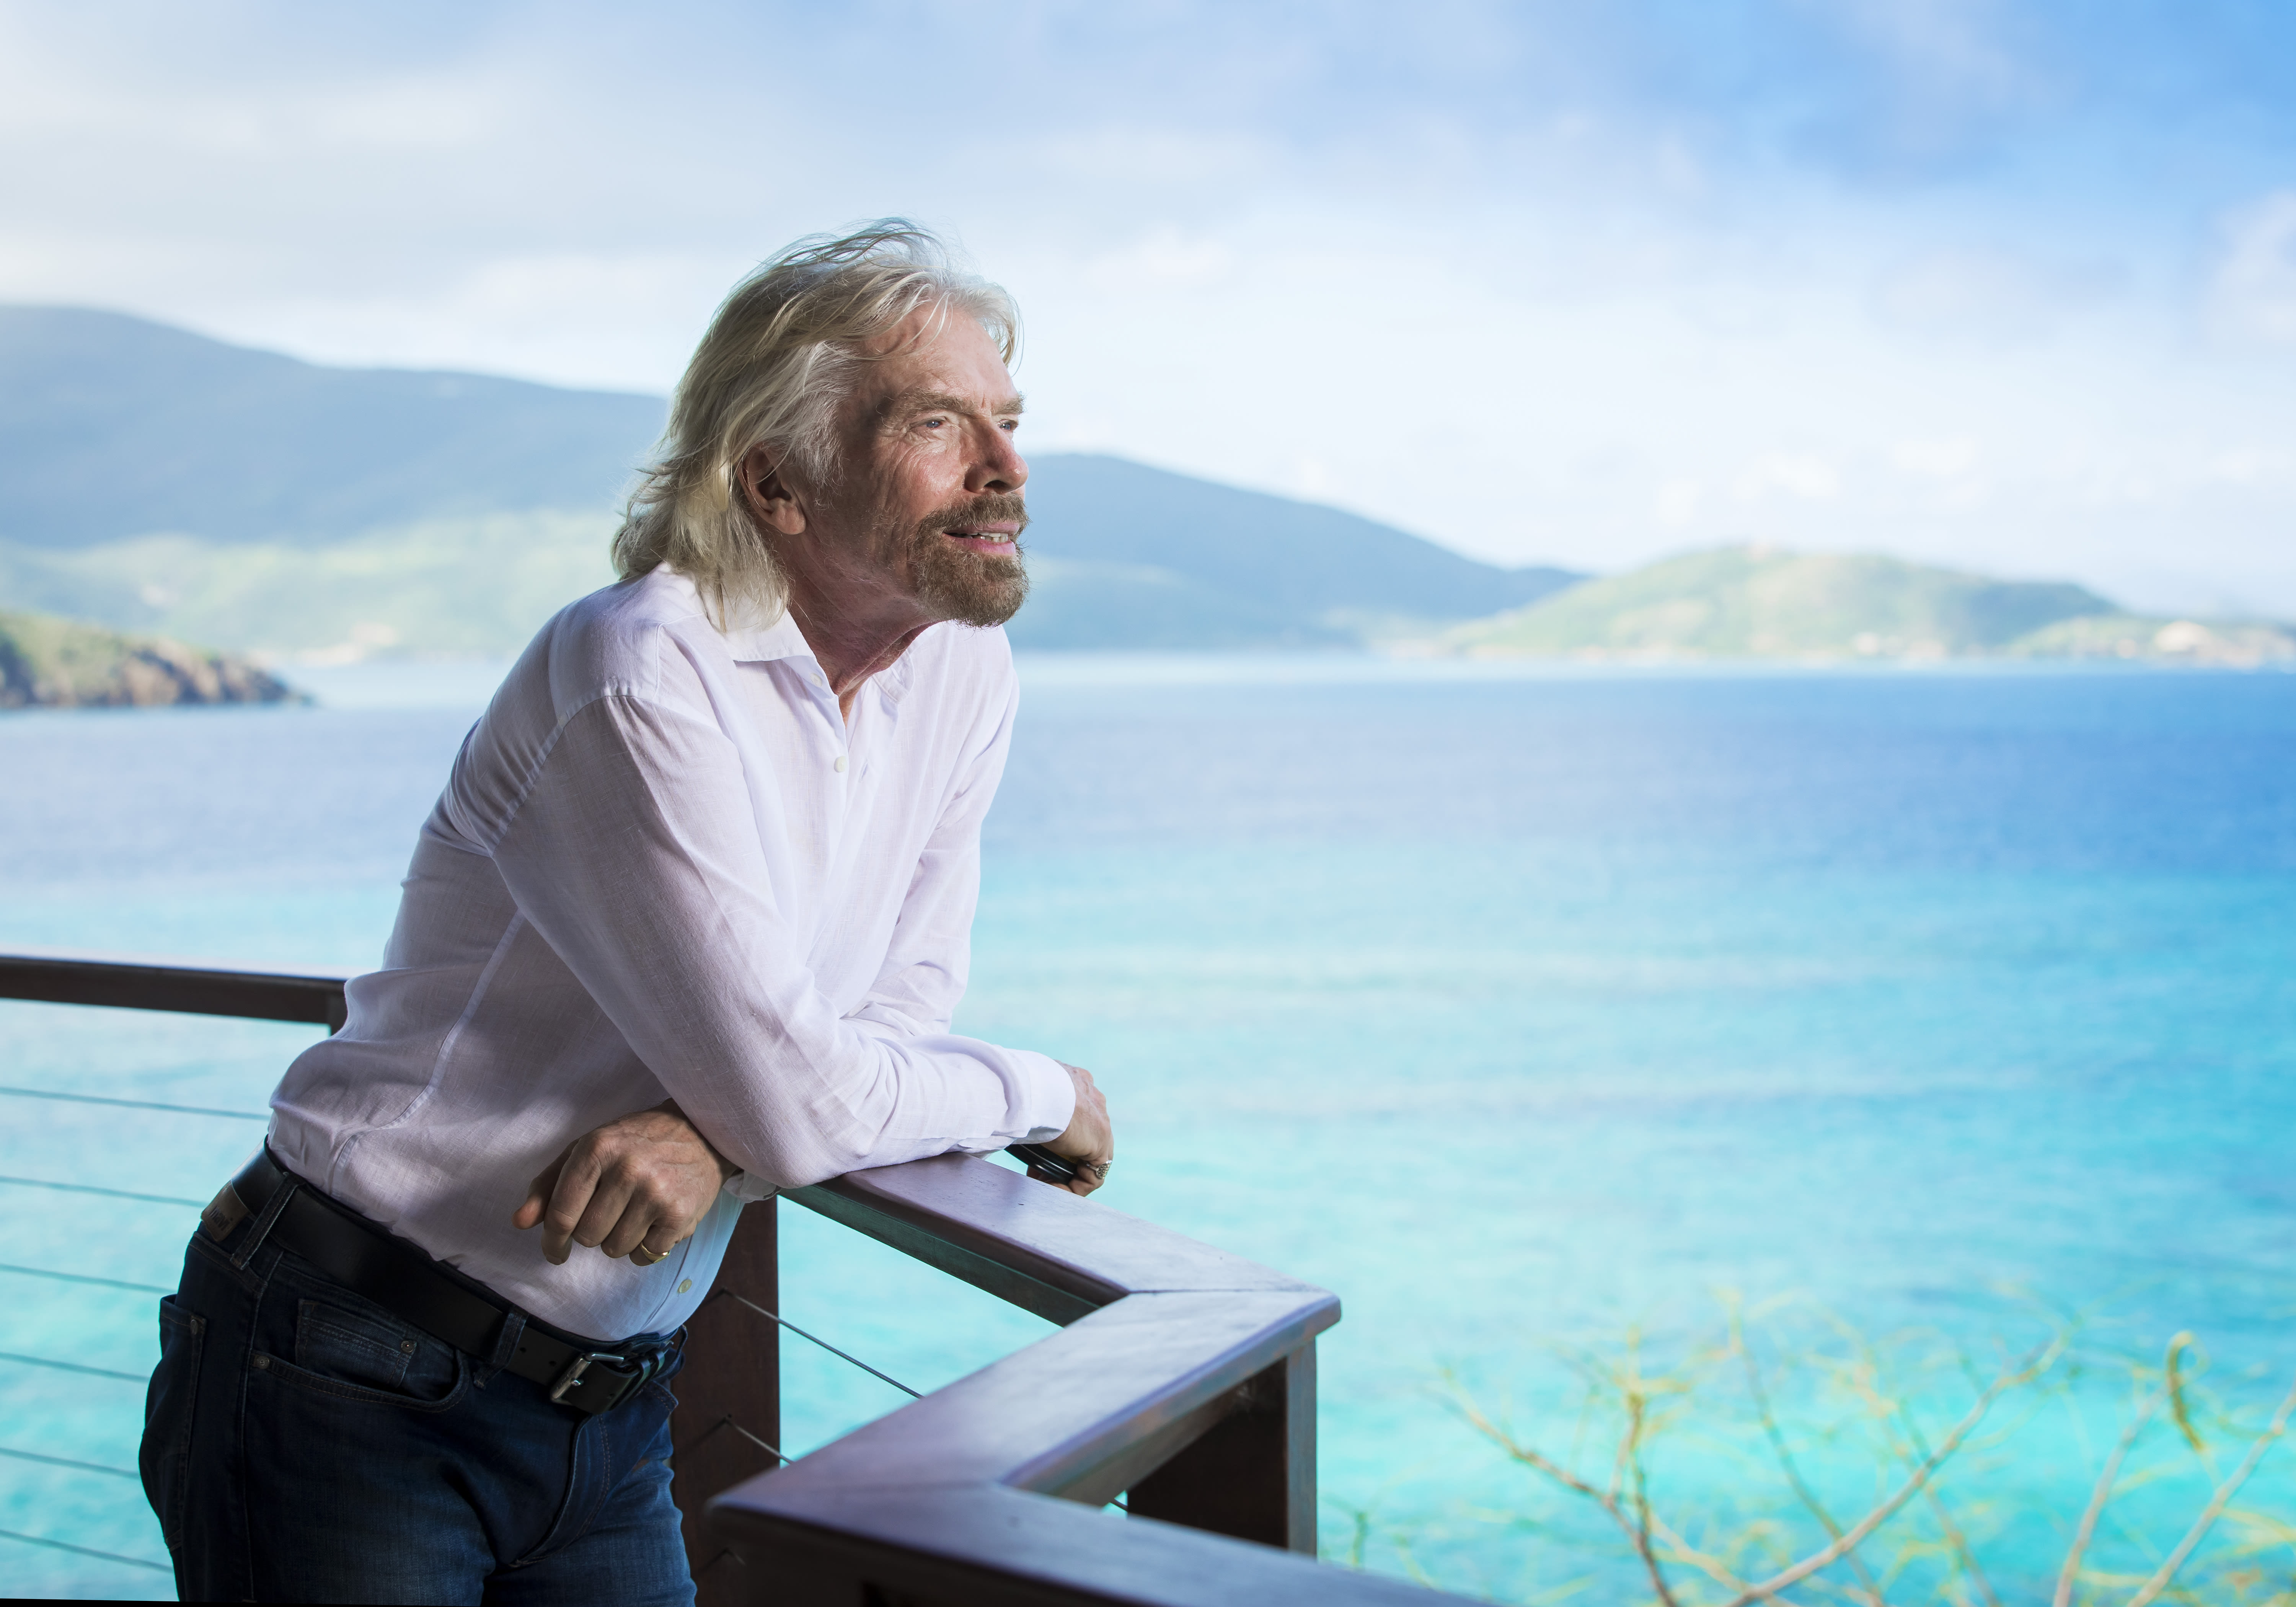 Richard Branson looking out over the ocean